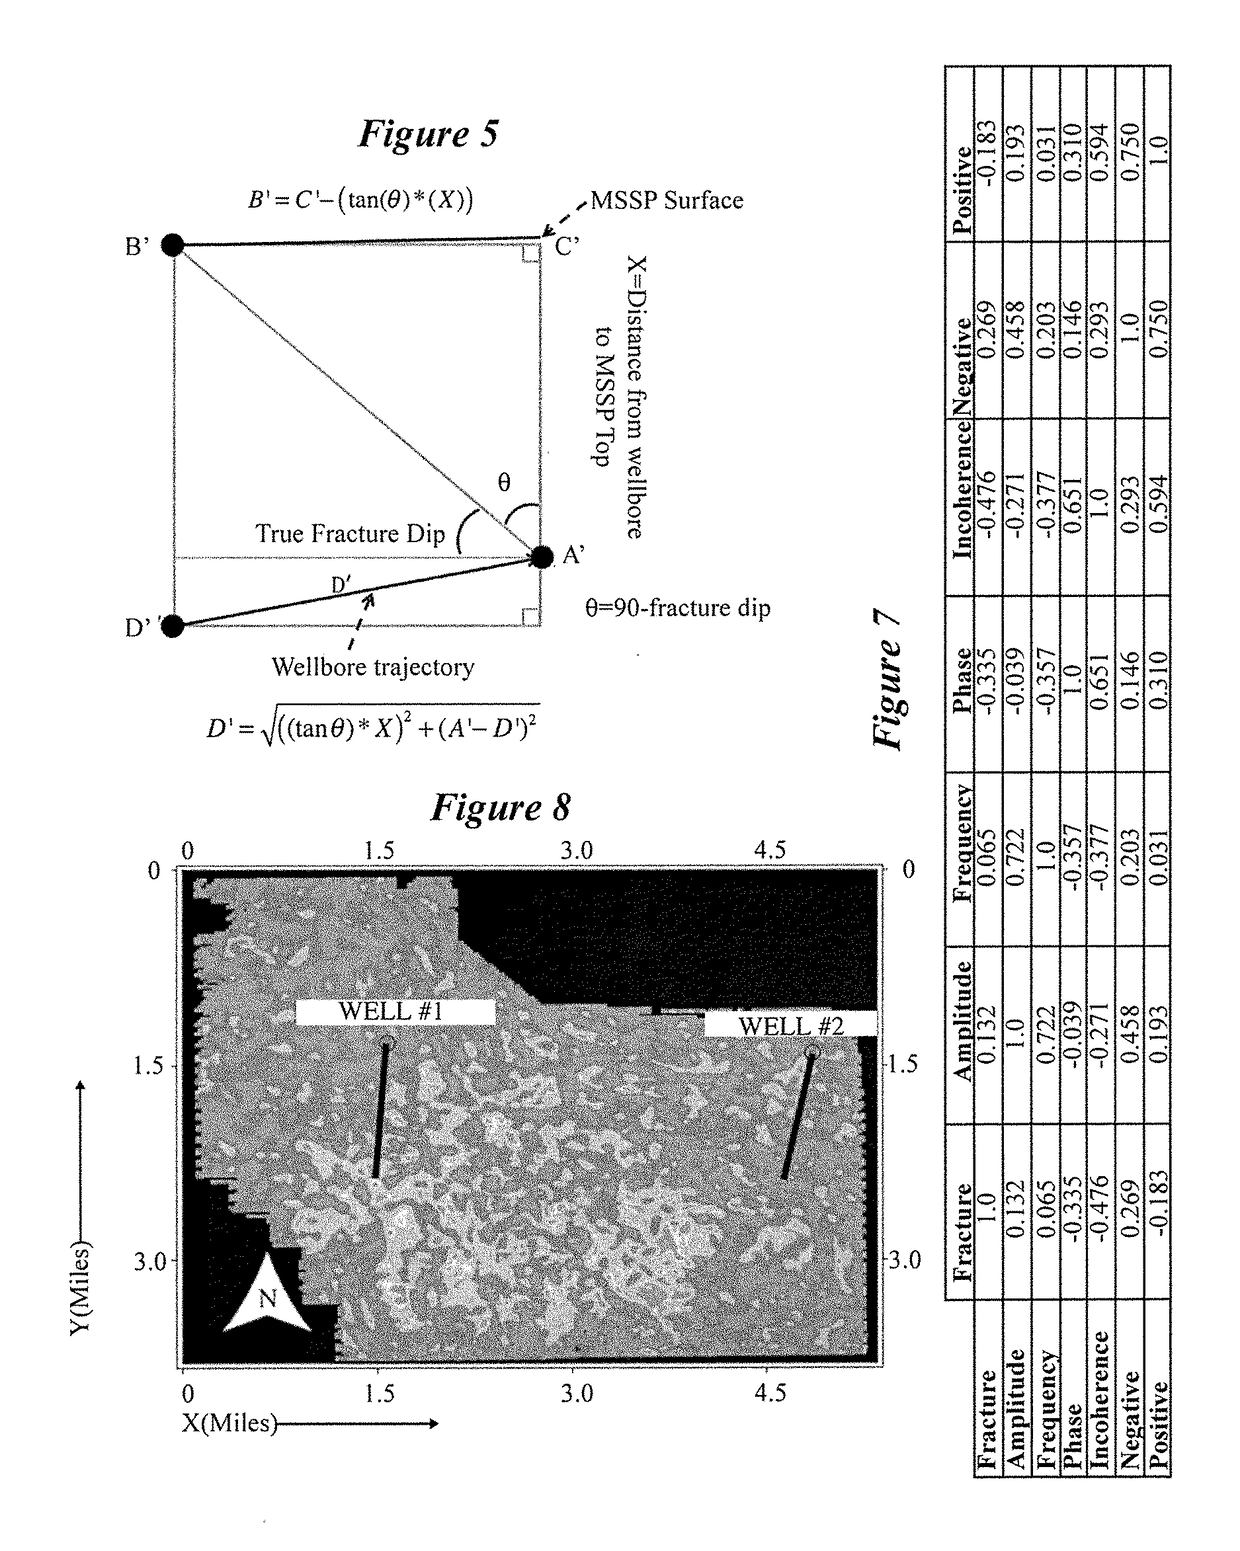 Methods of generation of fracture density maps from seismic data